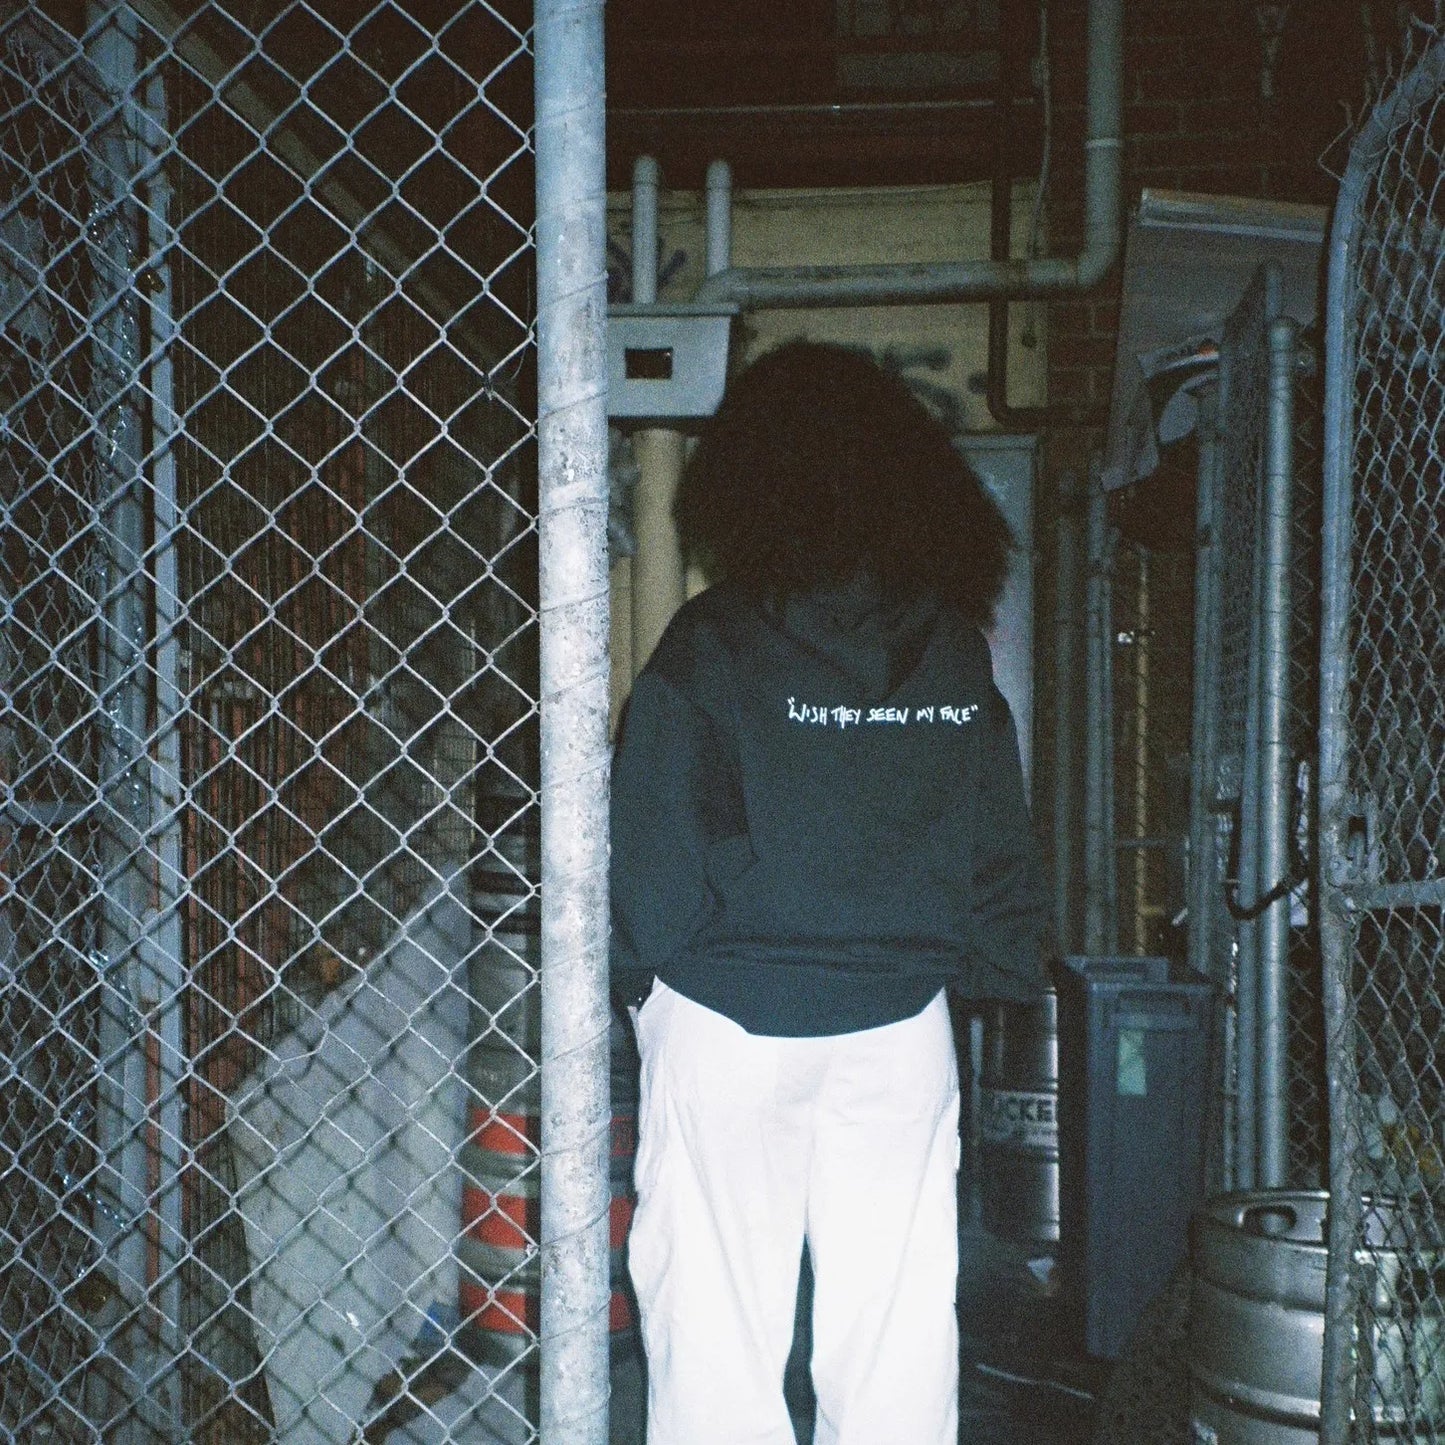 Person wearing the green Lithe hoodie with "wish they seen my face" text on the back, standing in an alleyway. Created after the popular single. Released in 2022.